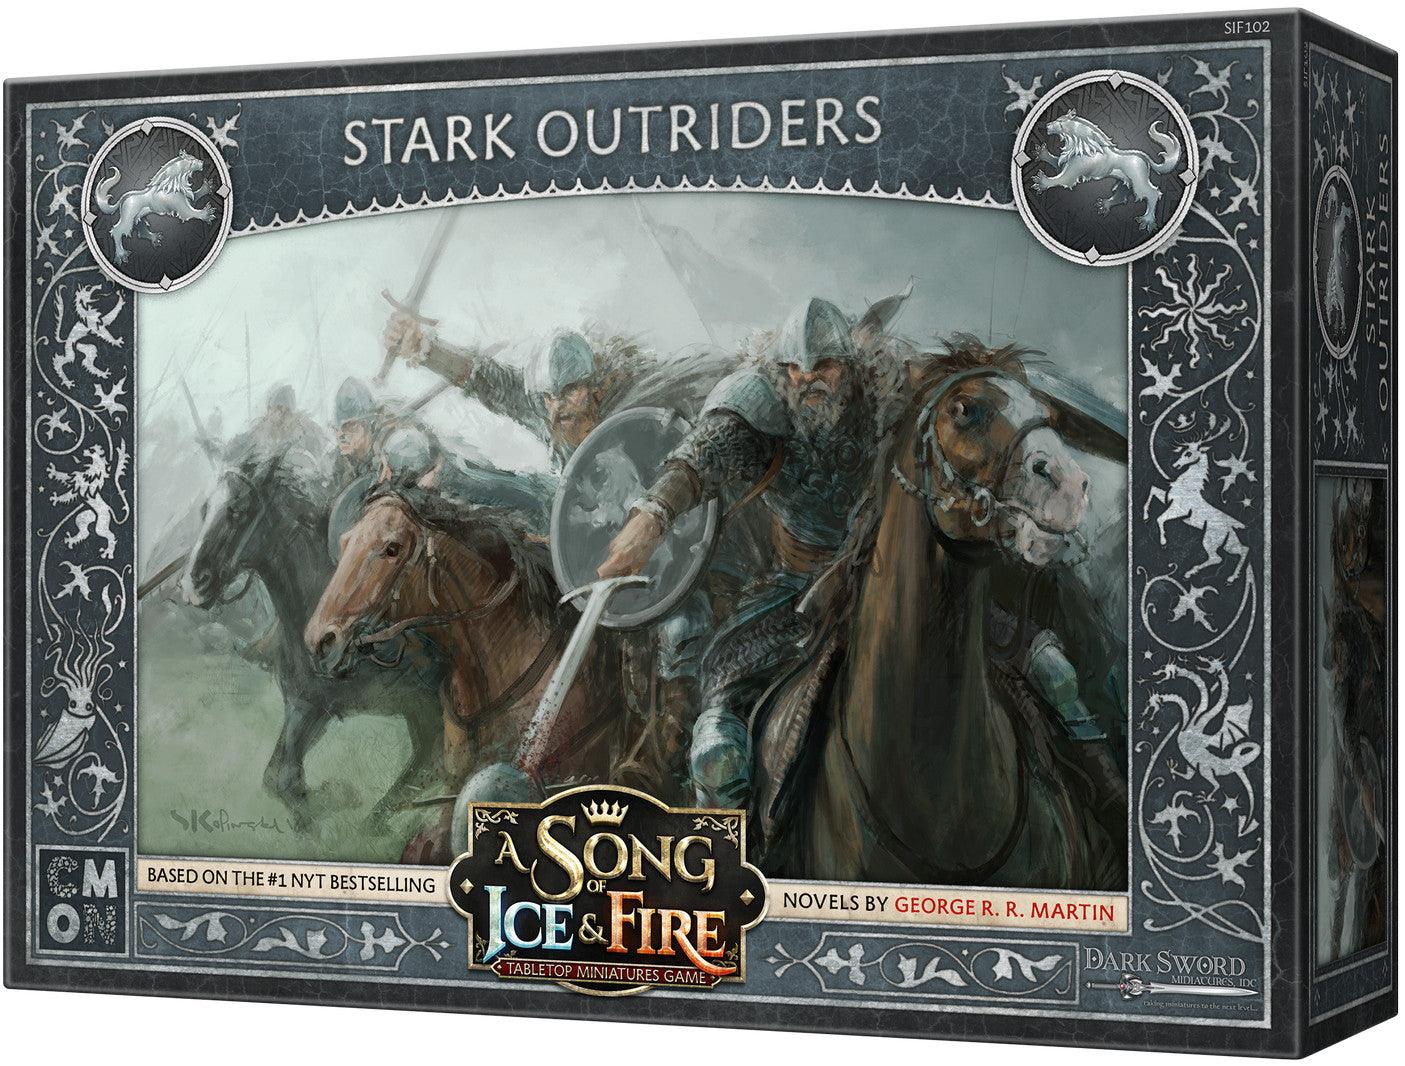 VR-60548 A Song of Ice and Fire TMG - Stark Outriders - CMON - Titan Pop Culture